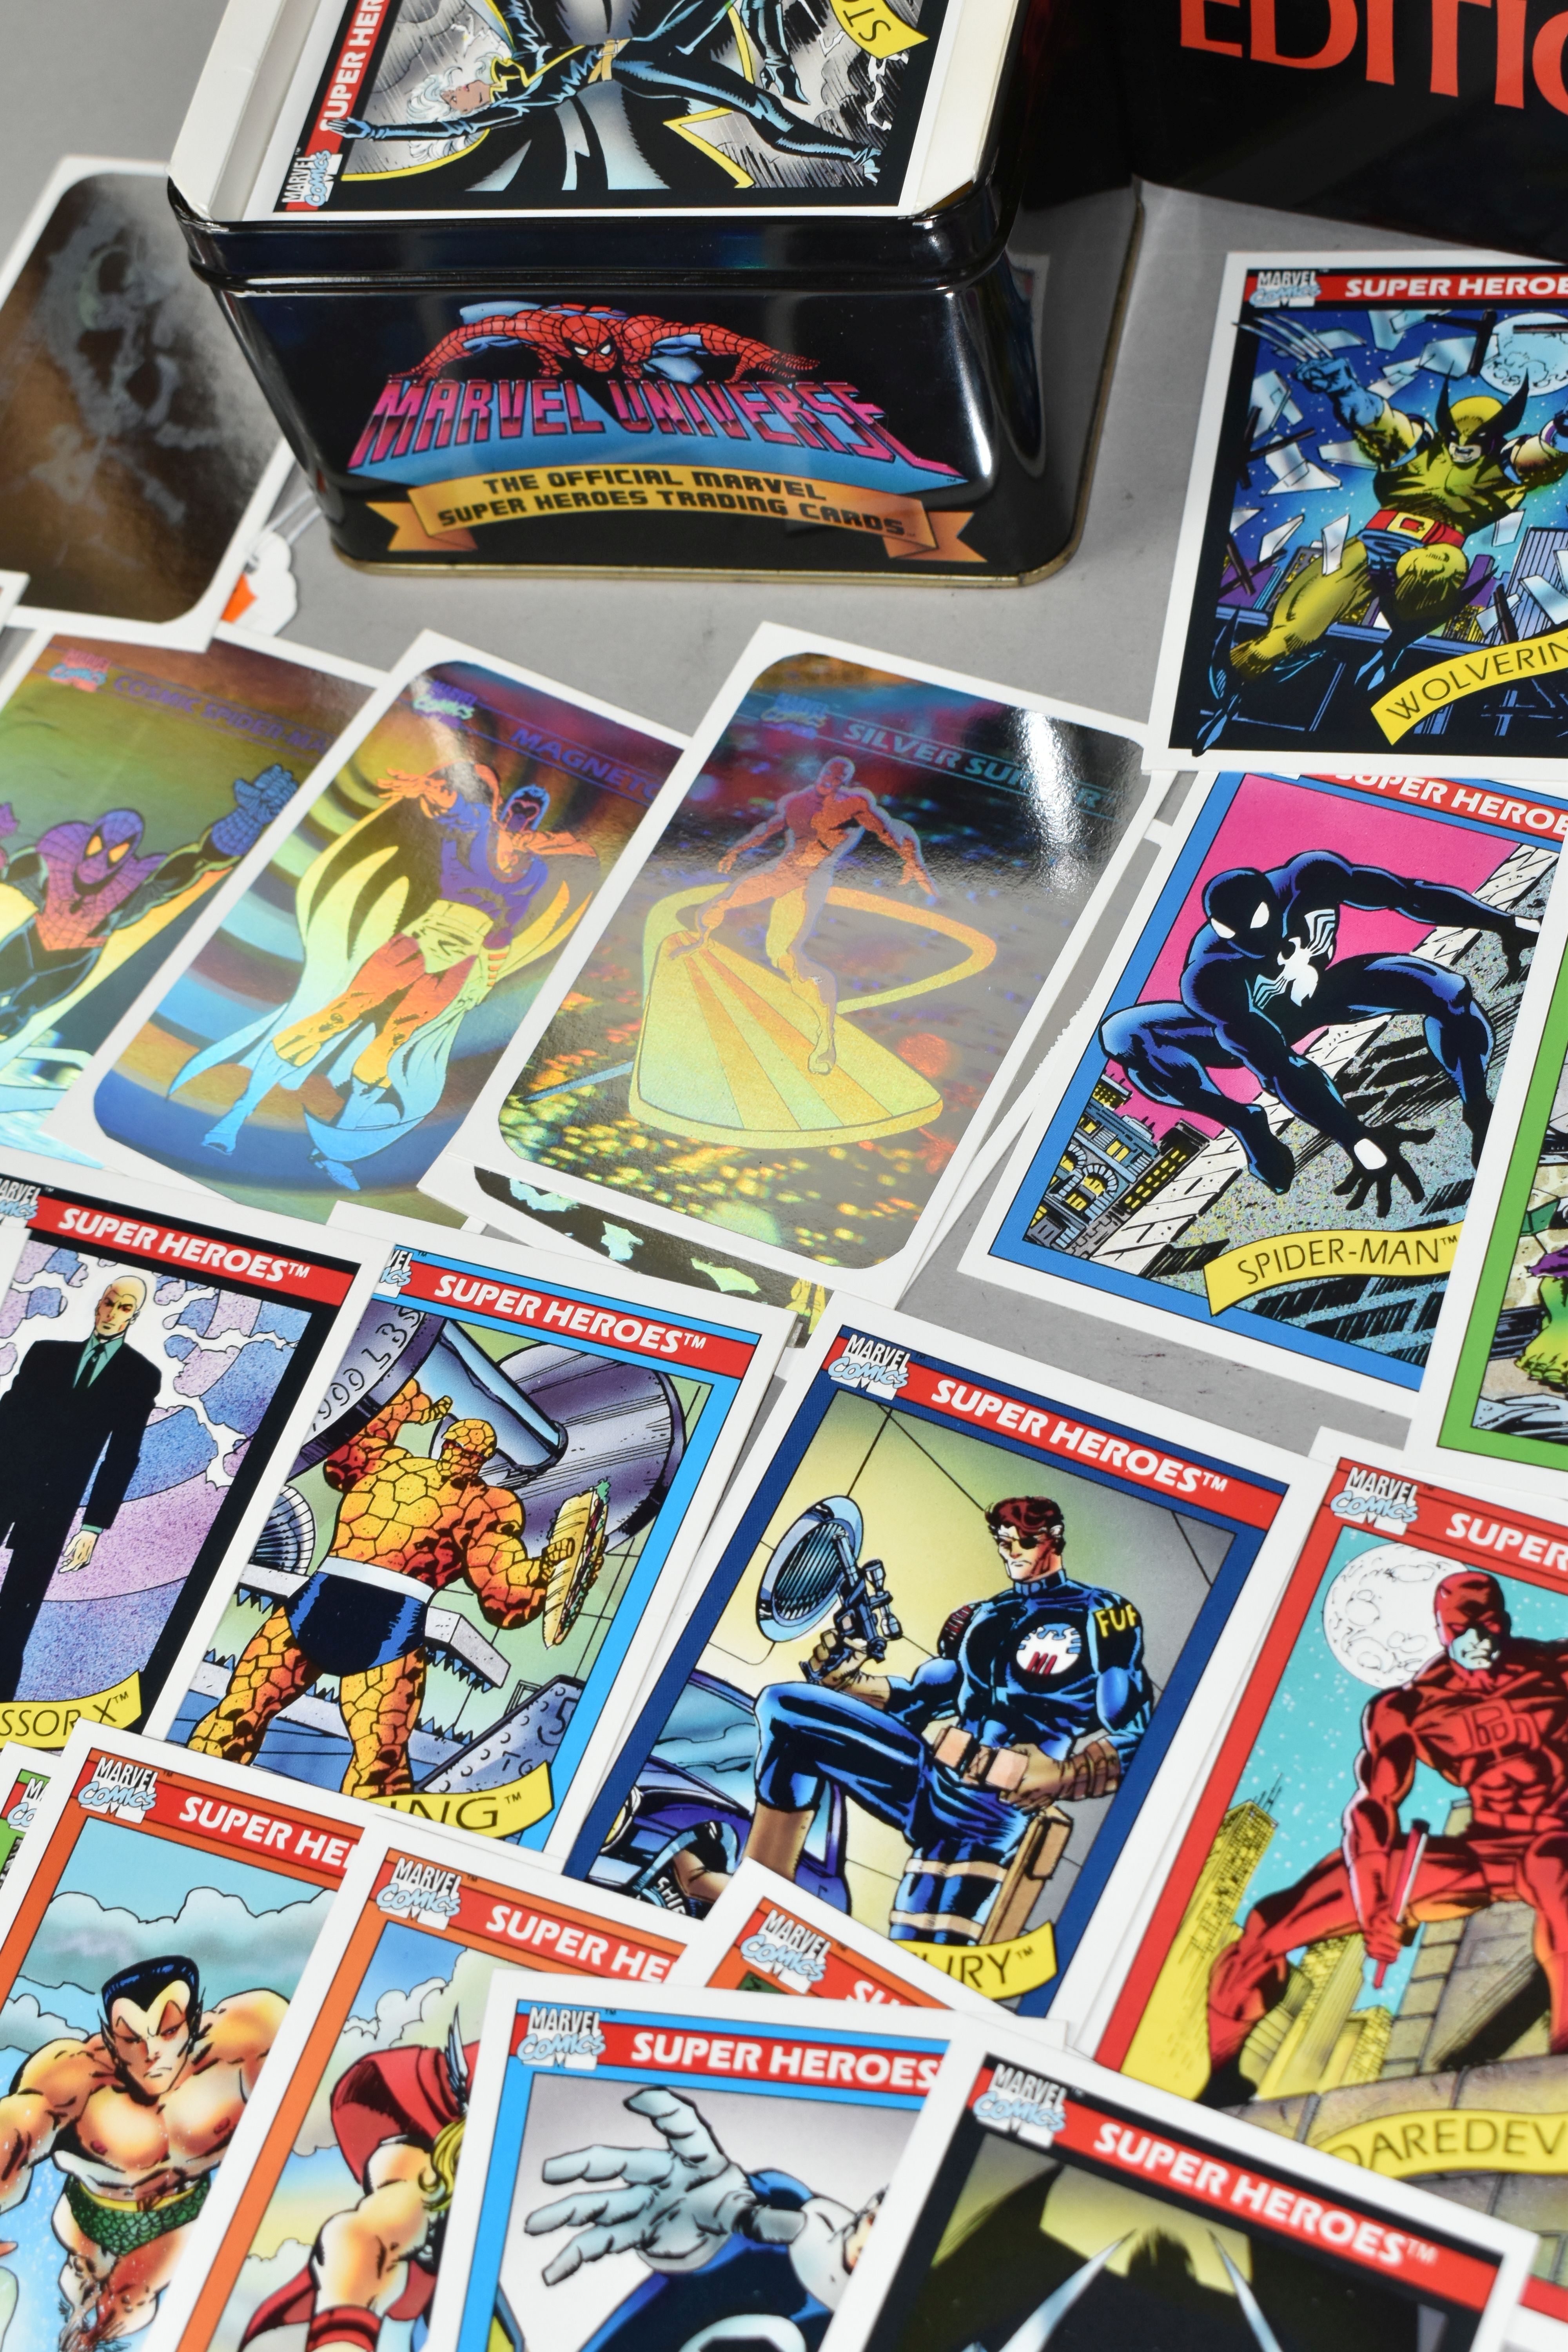 MARVEL UNIVERSE CARDS SERIES ONE PREMIER EDITION, all cards are present including the holos, and are - Image 3 of 3